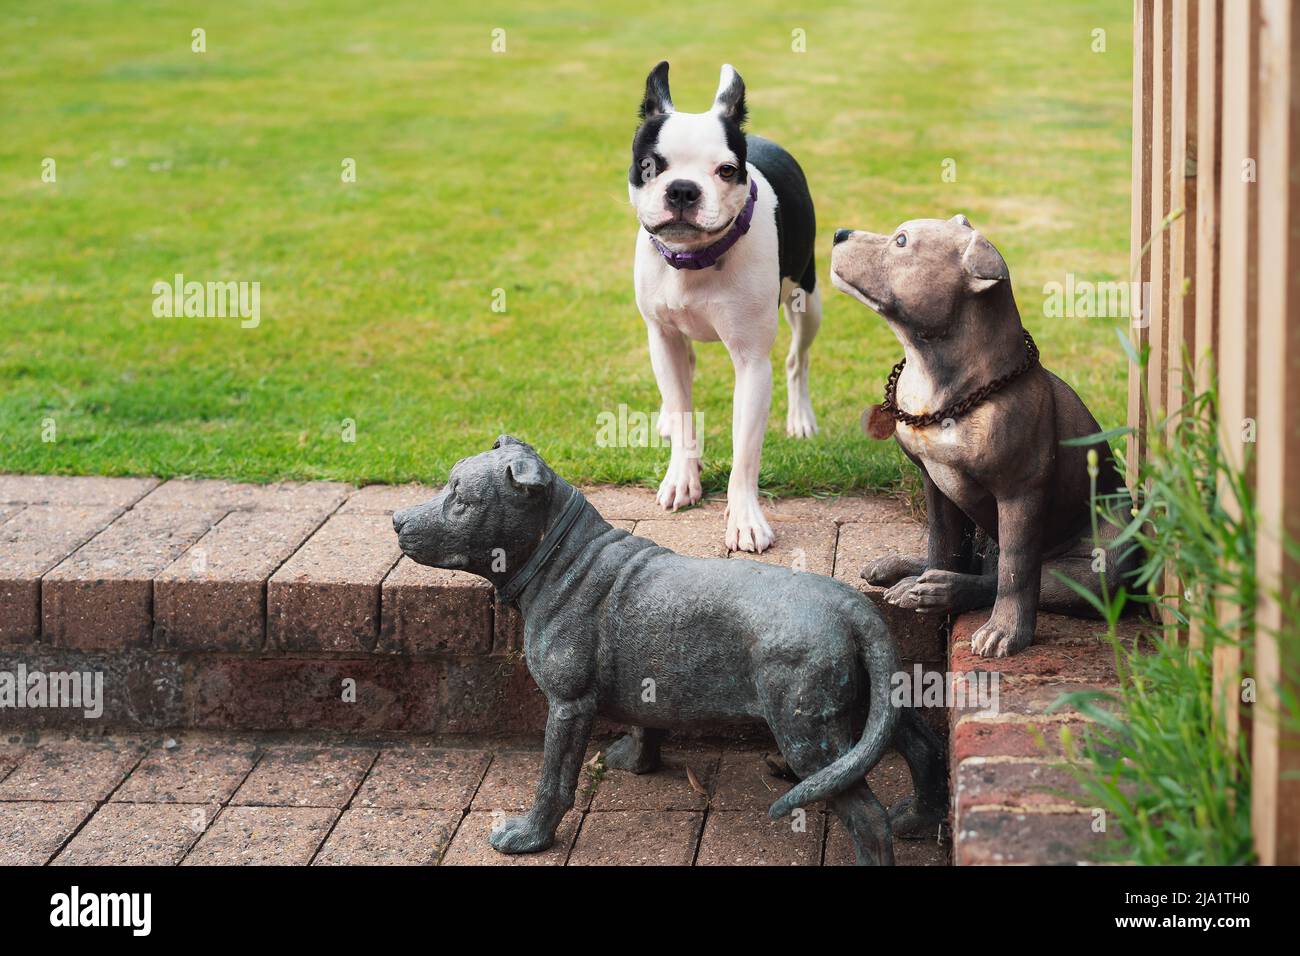 Young Boston Terrier dog standing at the top of garden steps with two model figurine dogs around her. One model dog appears to be looking at her. Stock Photo